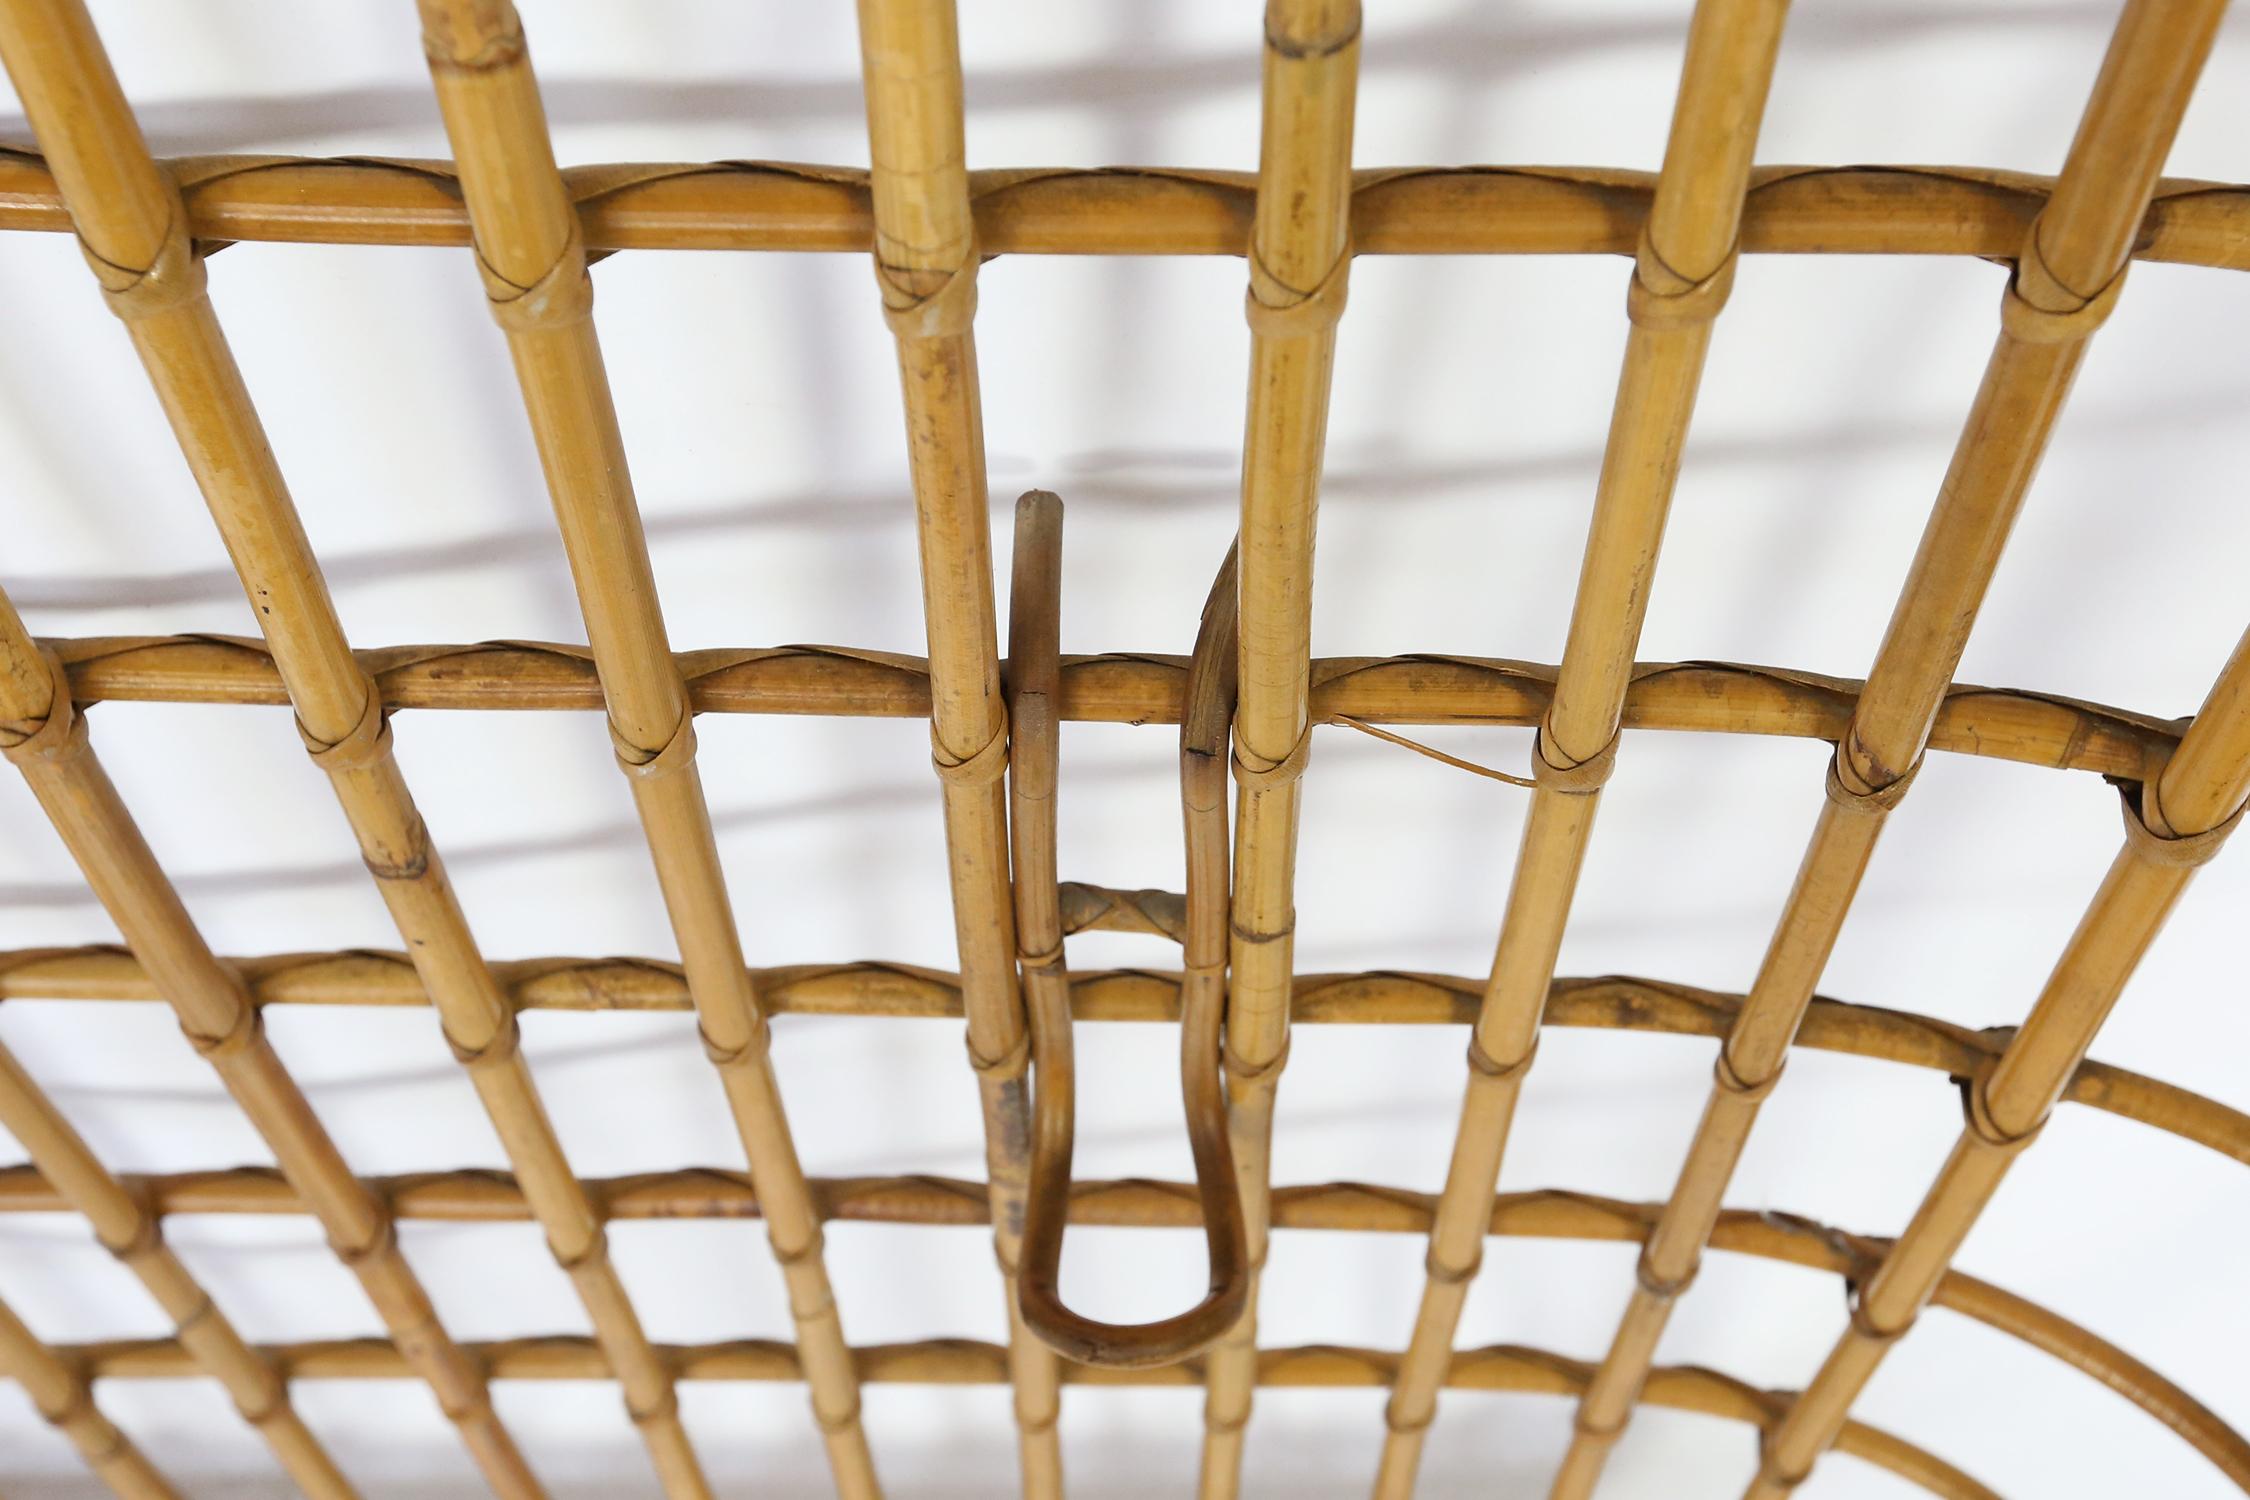 Mid-20th Century Italian Rattan and Bamboo Wall Hanging Coat Hanger by Olaf von Bohr, 1960s